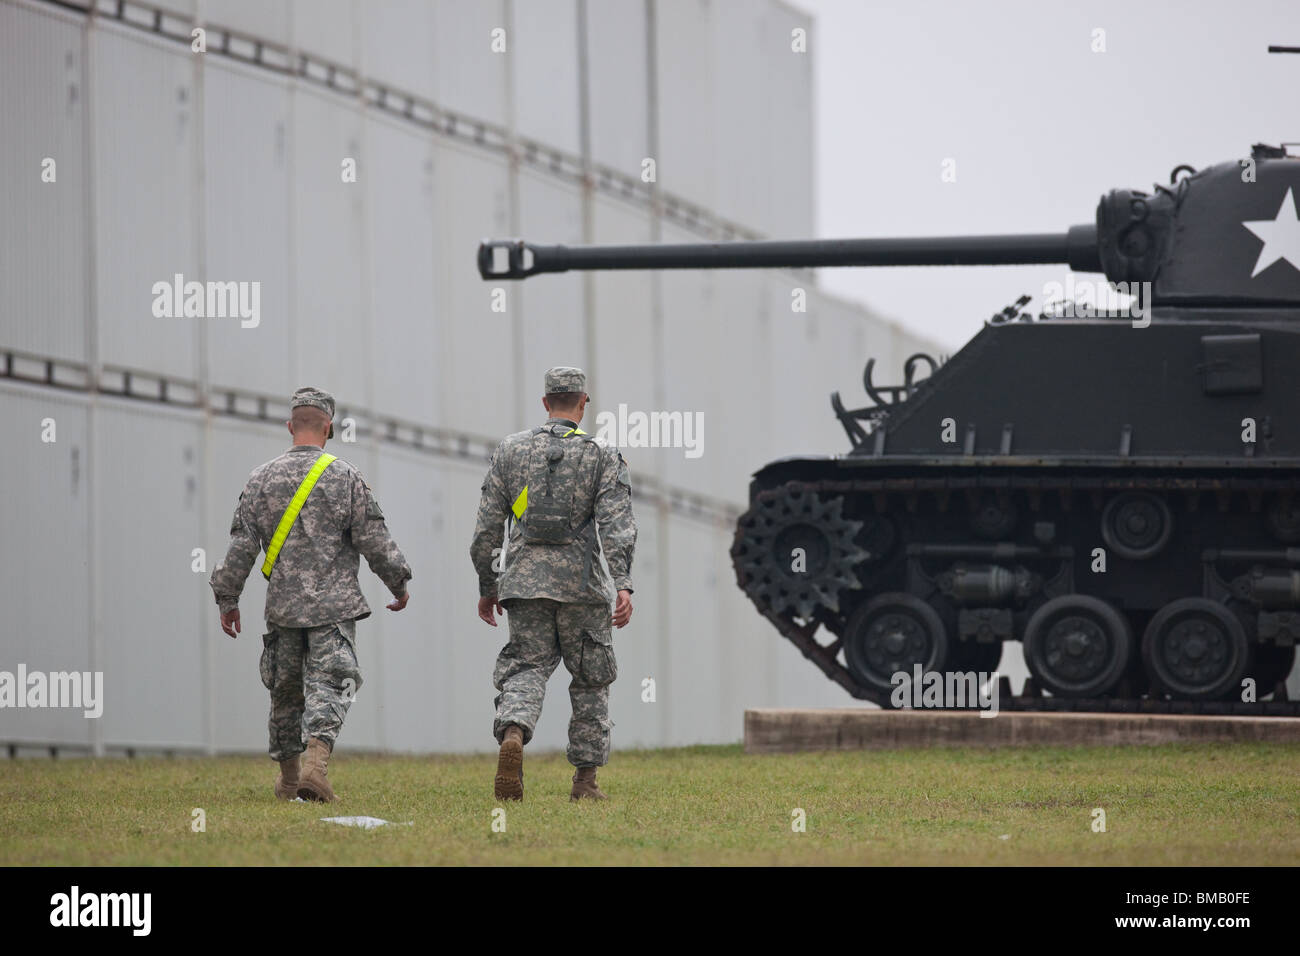 Two U.S. Army soldiers  walk past a tank on display at Fort Hood, a large military base near Killeen, Texas, USA. Stock Photo